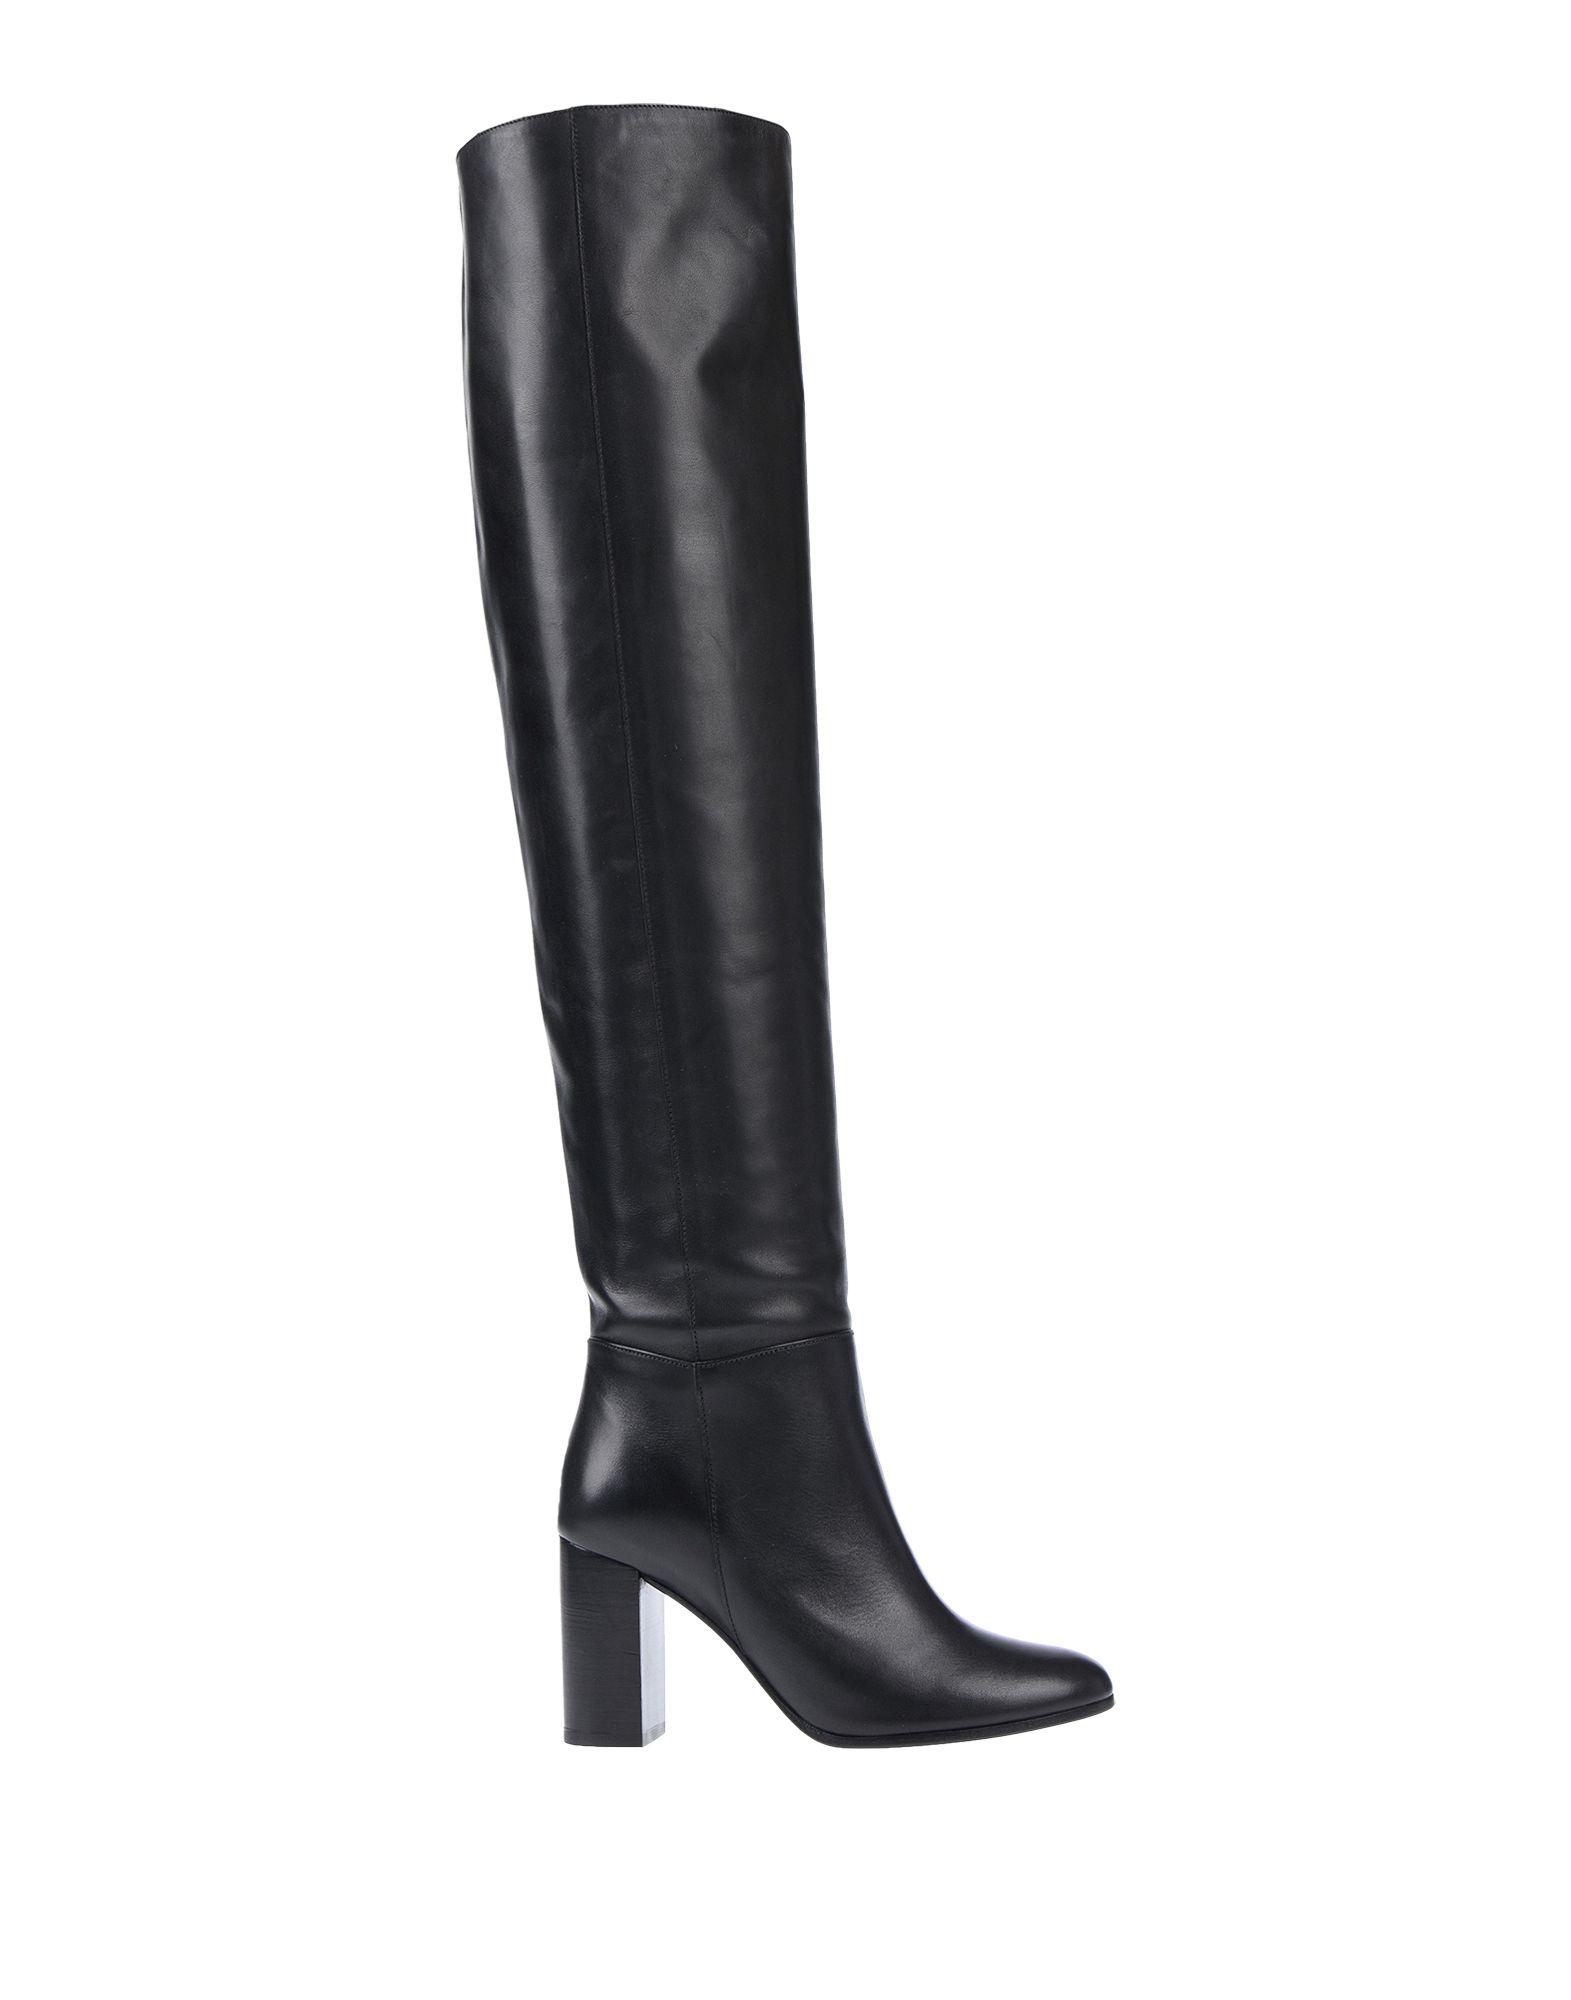 Maje Leather Boots in Black - Lyst